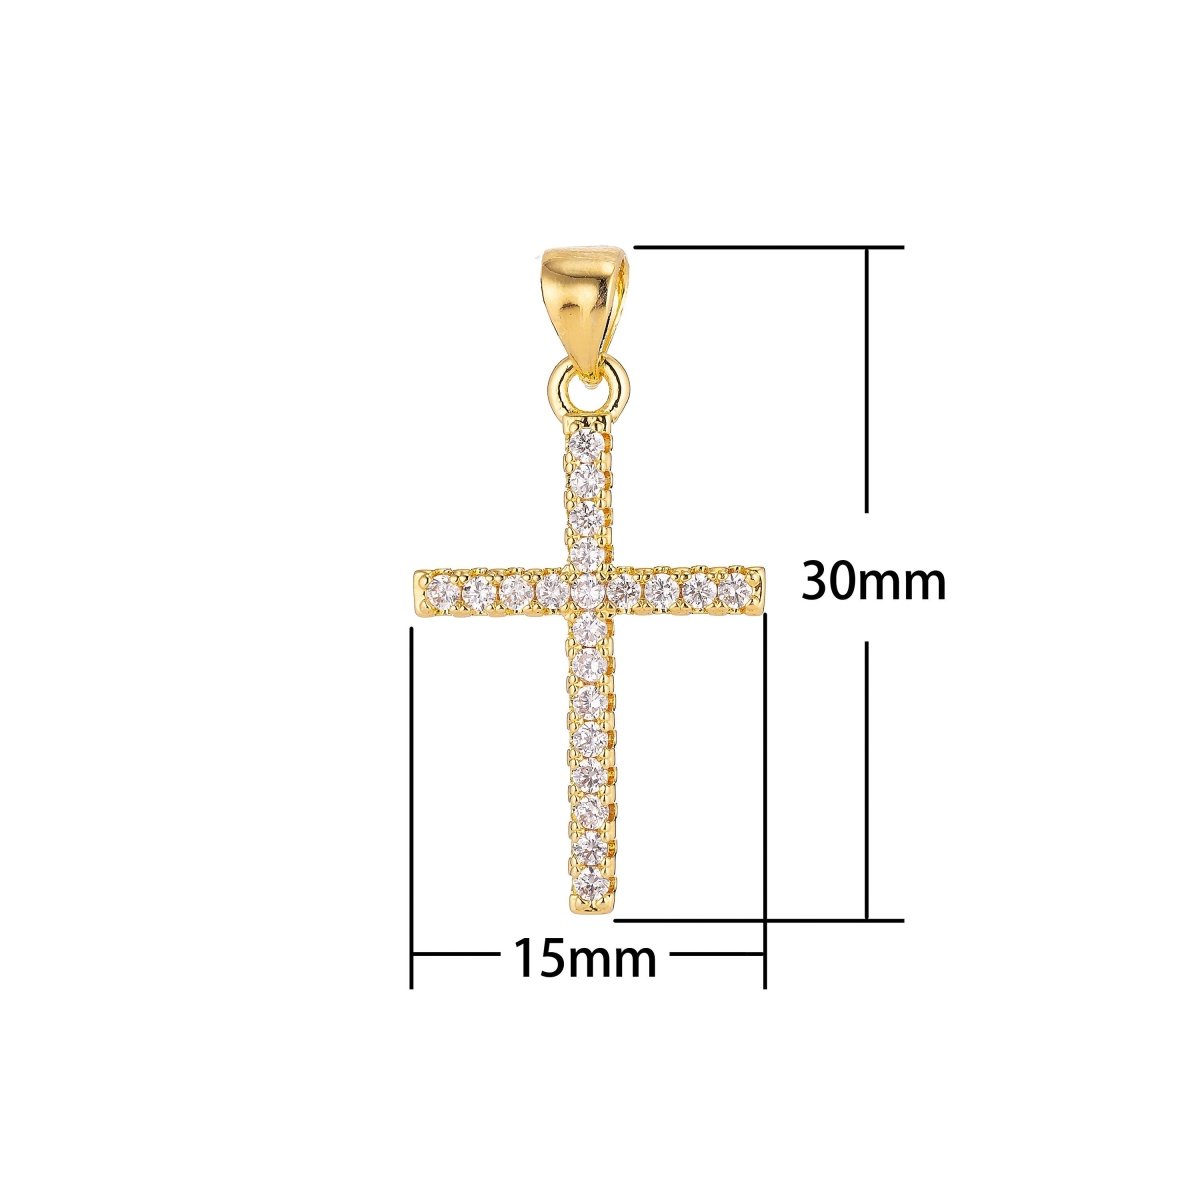 24K Gold Filled Christian Minimalist Simple Cross Jesus Cubic Zirconia Necklace Pendant Bracelet Earring Charm Bails for Jewelry Making AA-760 H-054 H-247 - DLUXCA